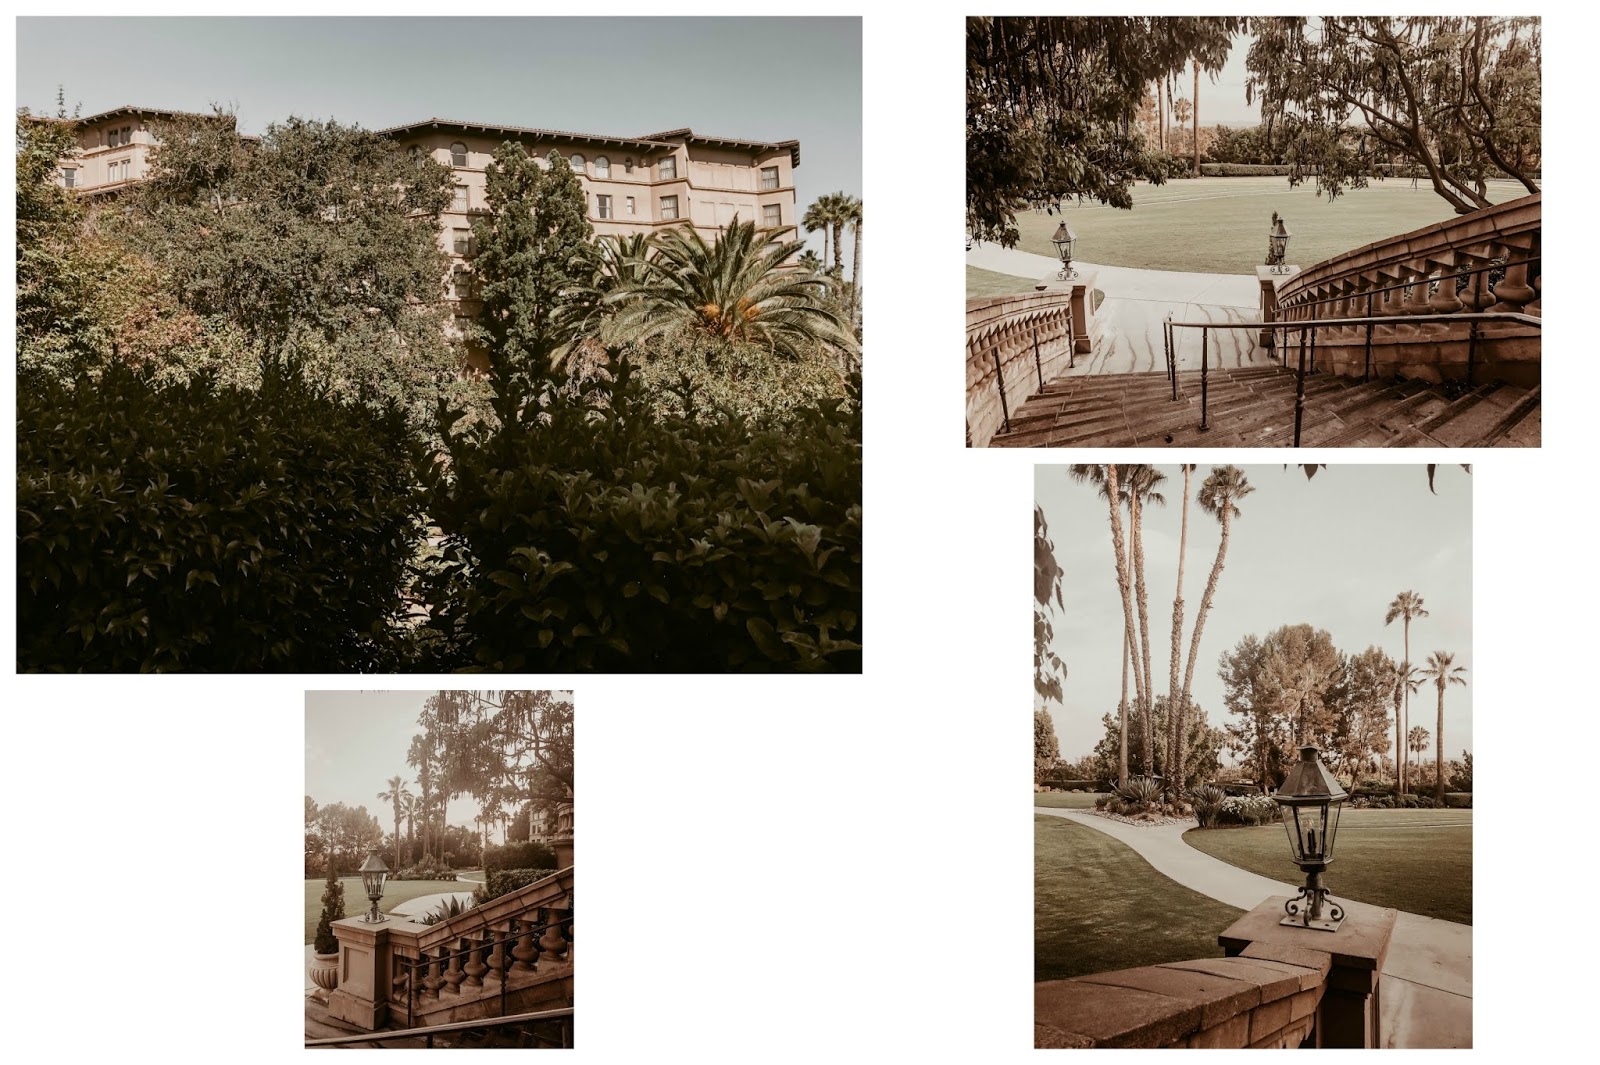 the-most-memorable-end-of-summer2019-staycation-at-the-langham-huntington-hotel-pasadena-california